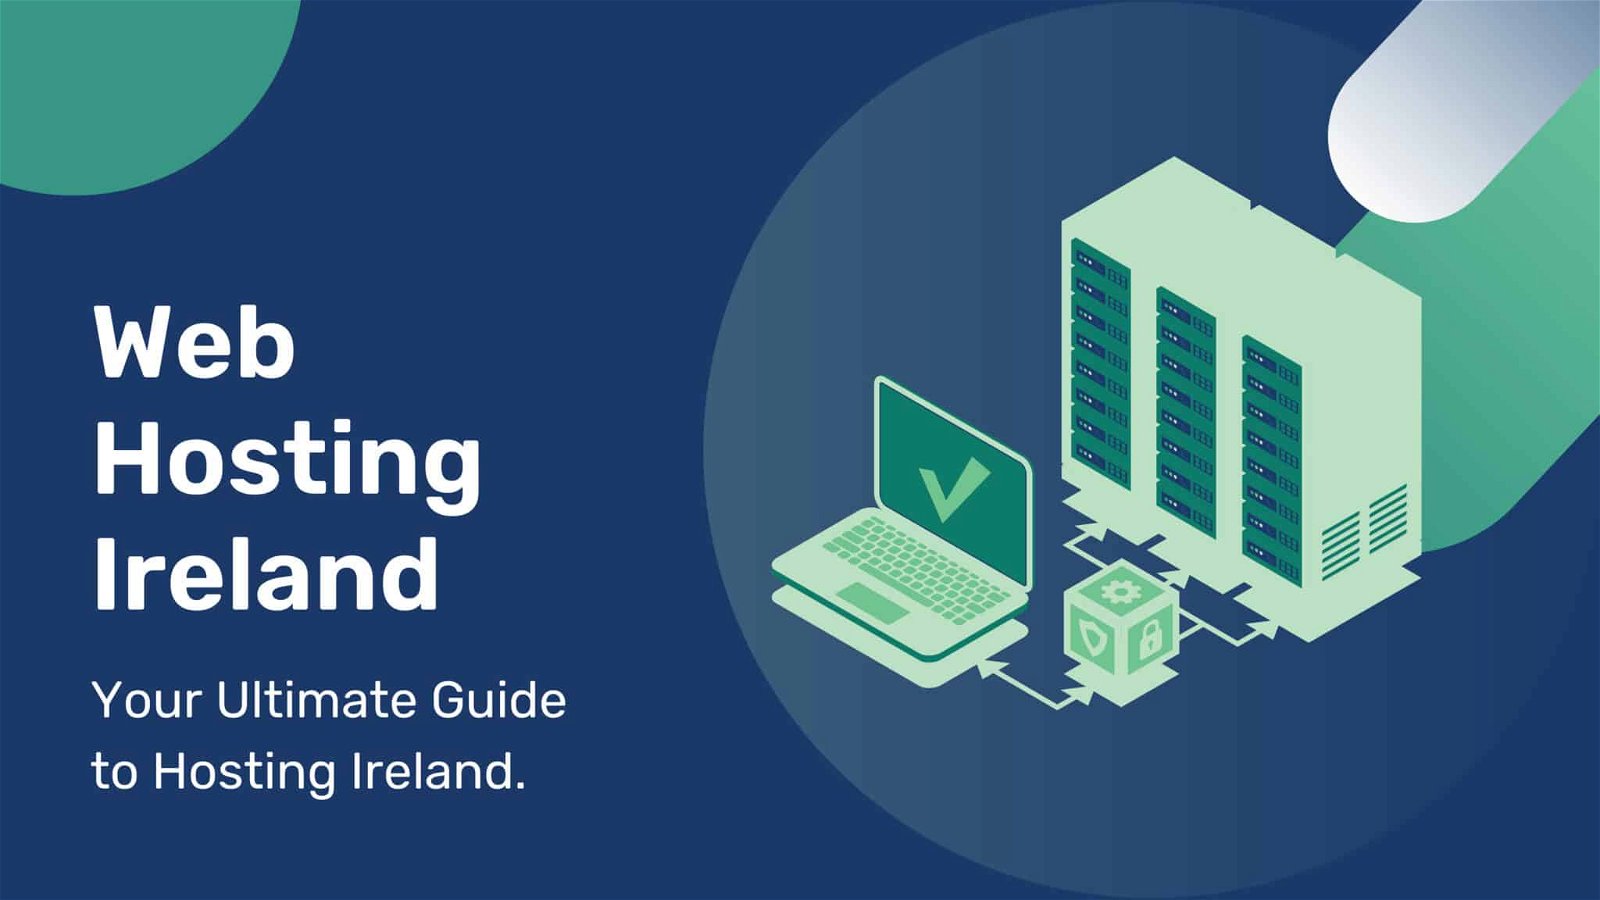 This image provides a guide to hosting services available in Ireland.